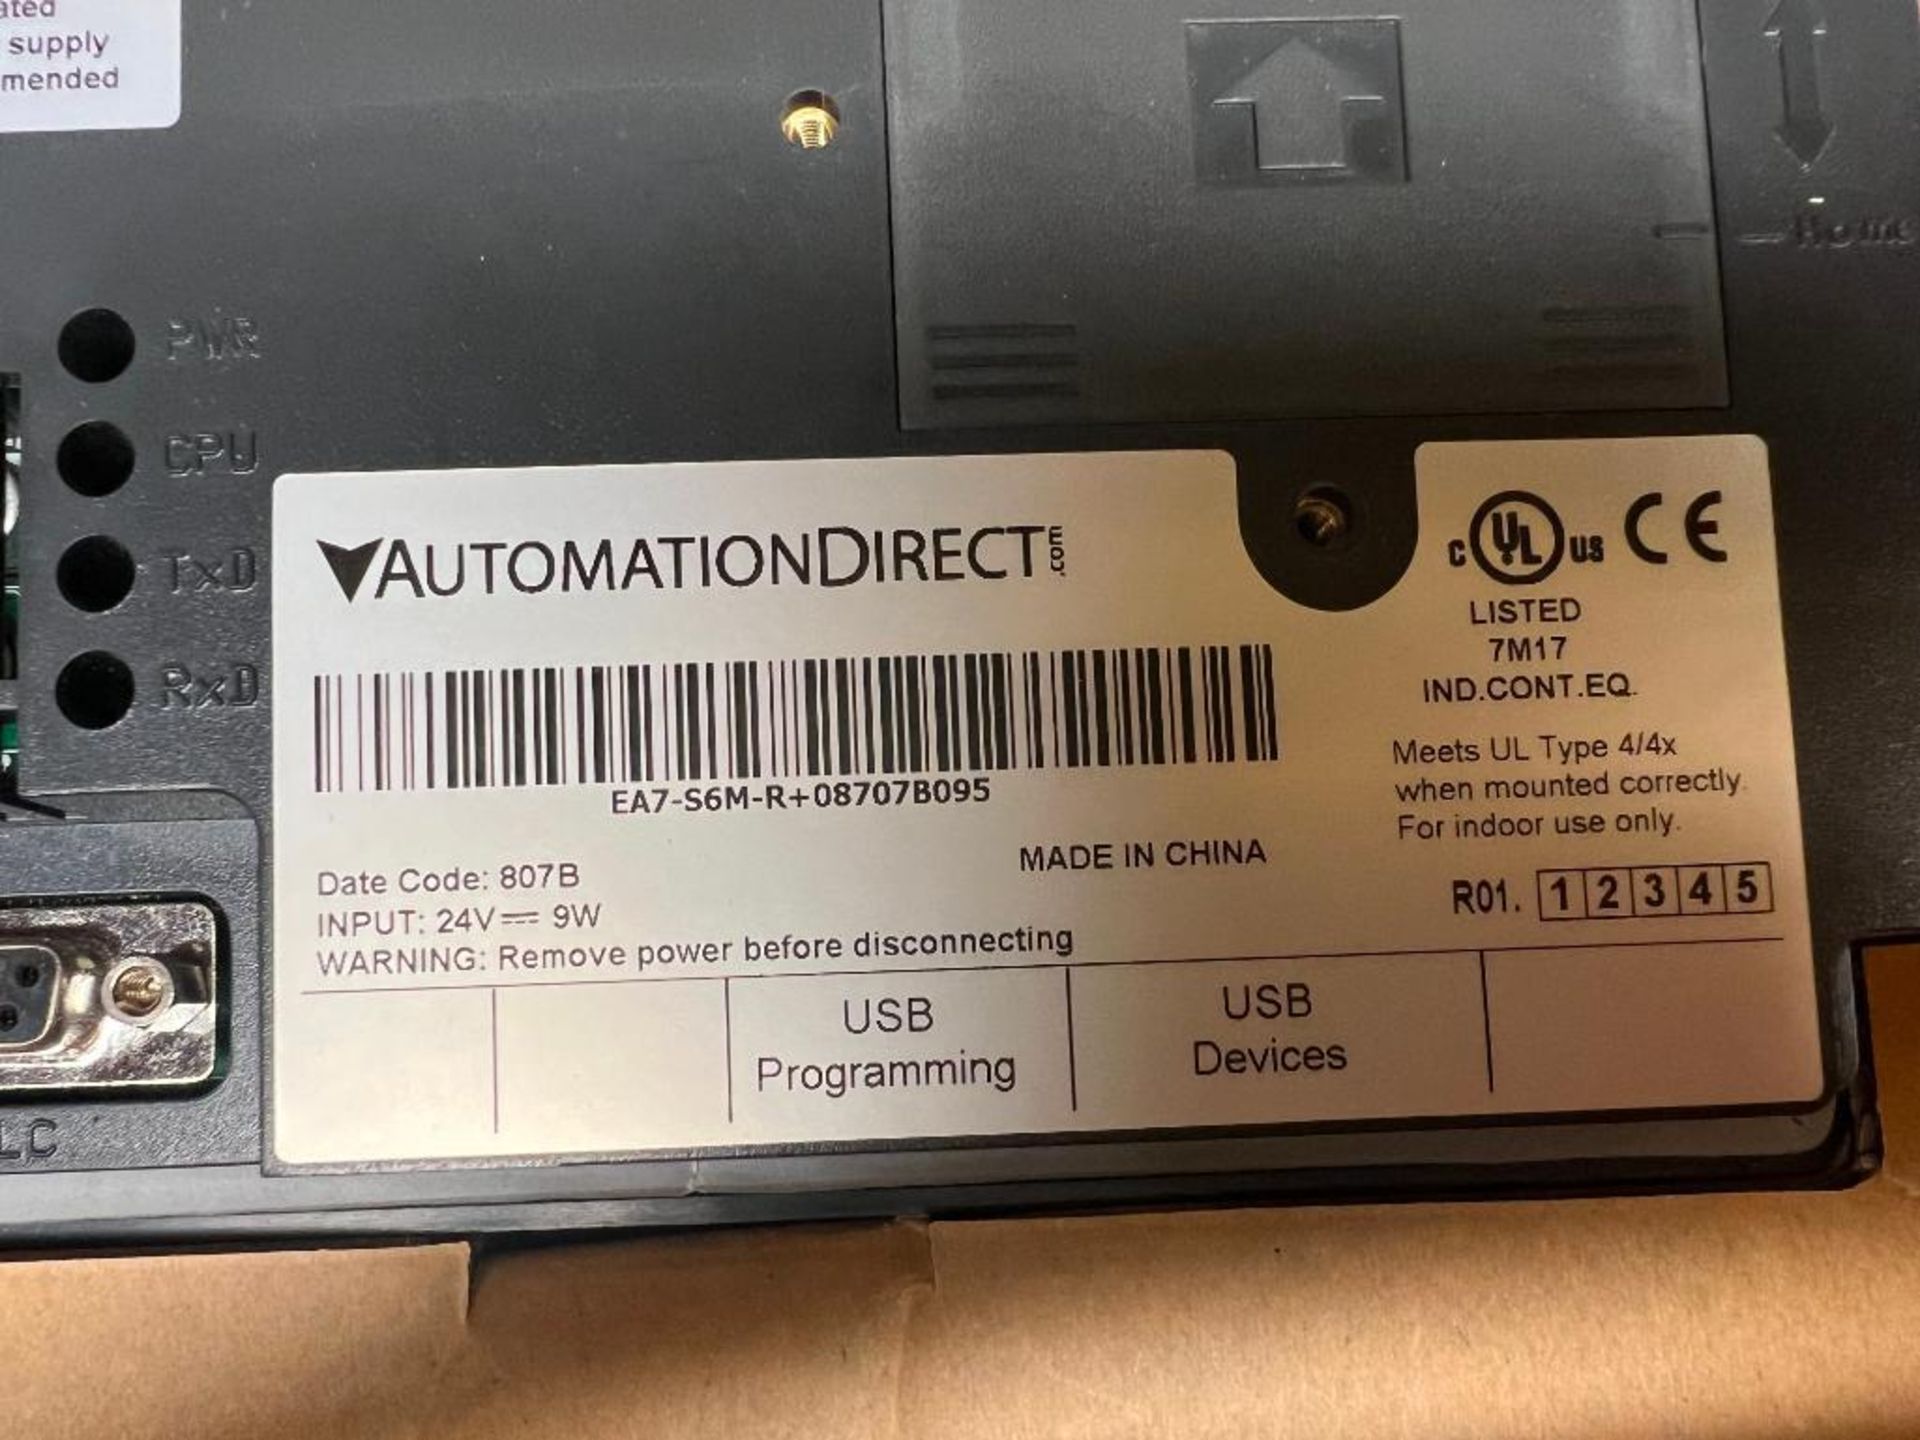 AUTOMATION DIRECT EA7-S6M-R+08707B095. Packaging Fee = $25 - Image 4 of 4